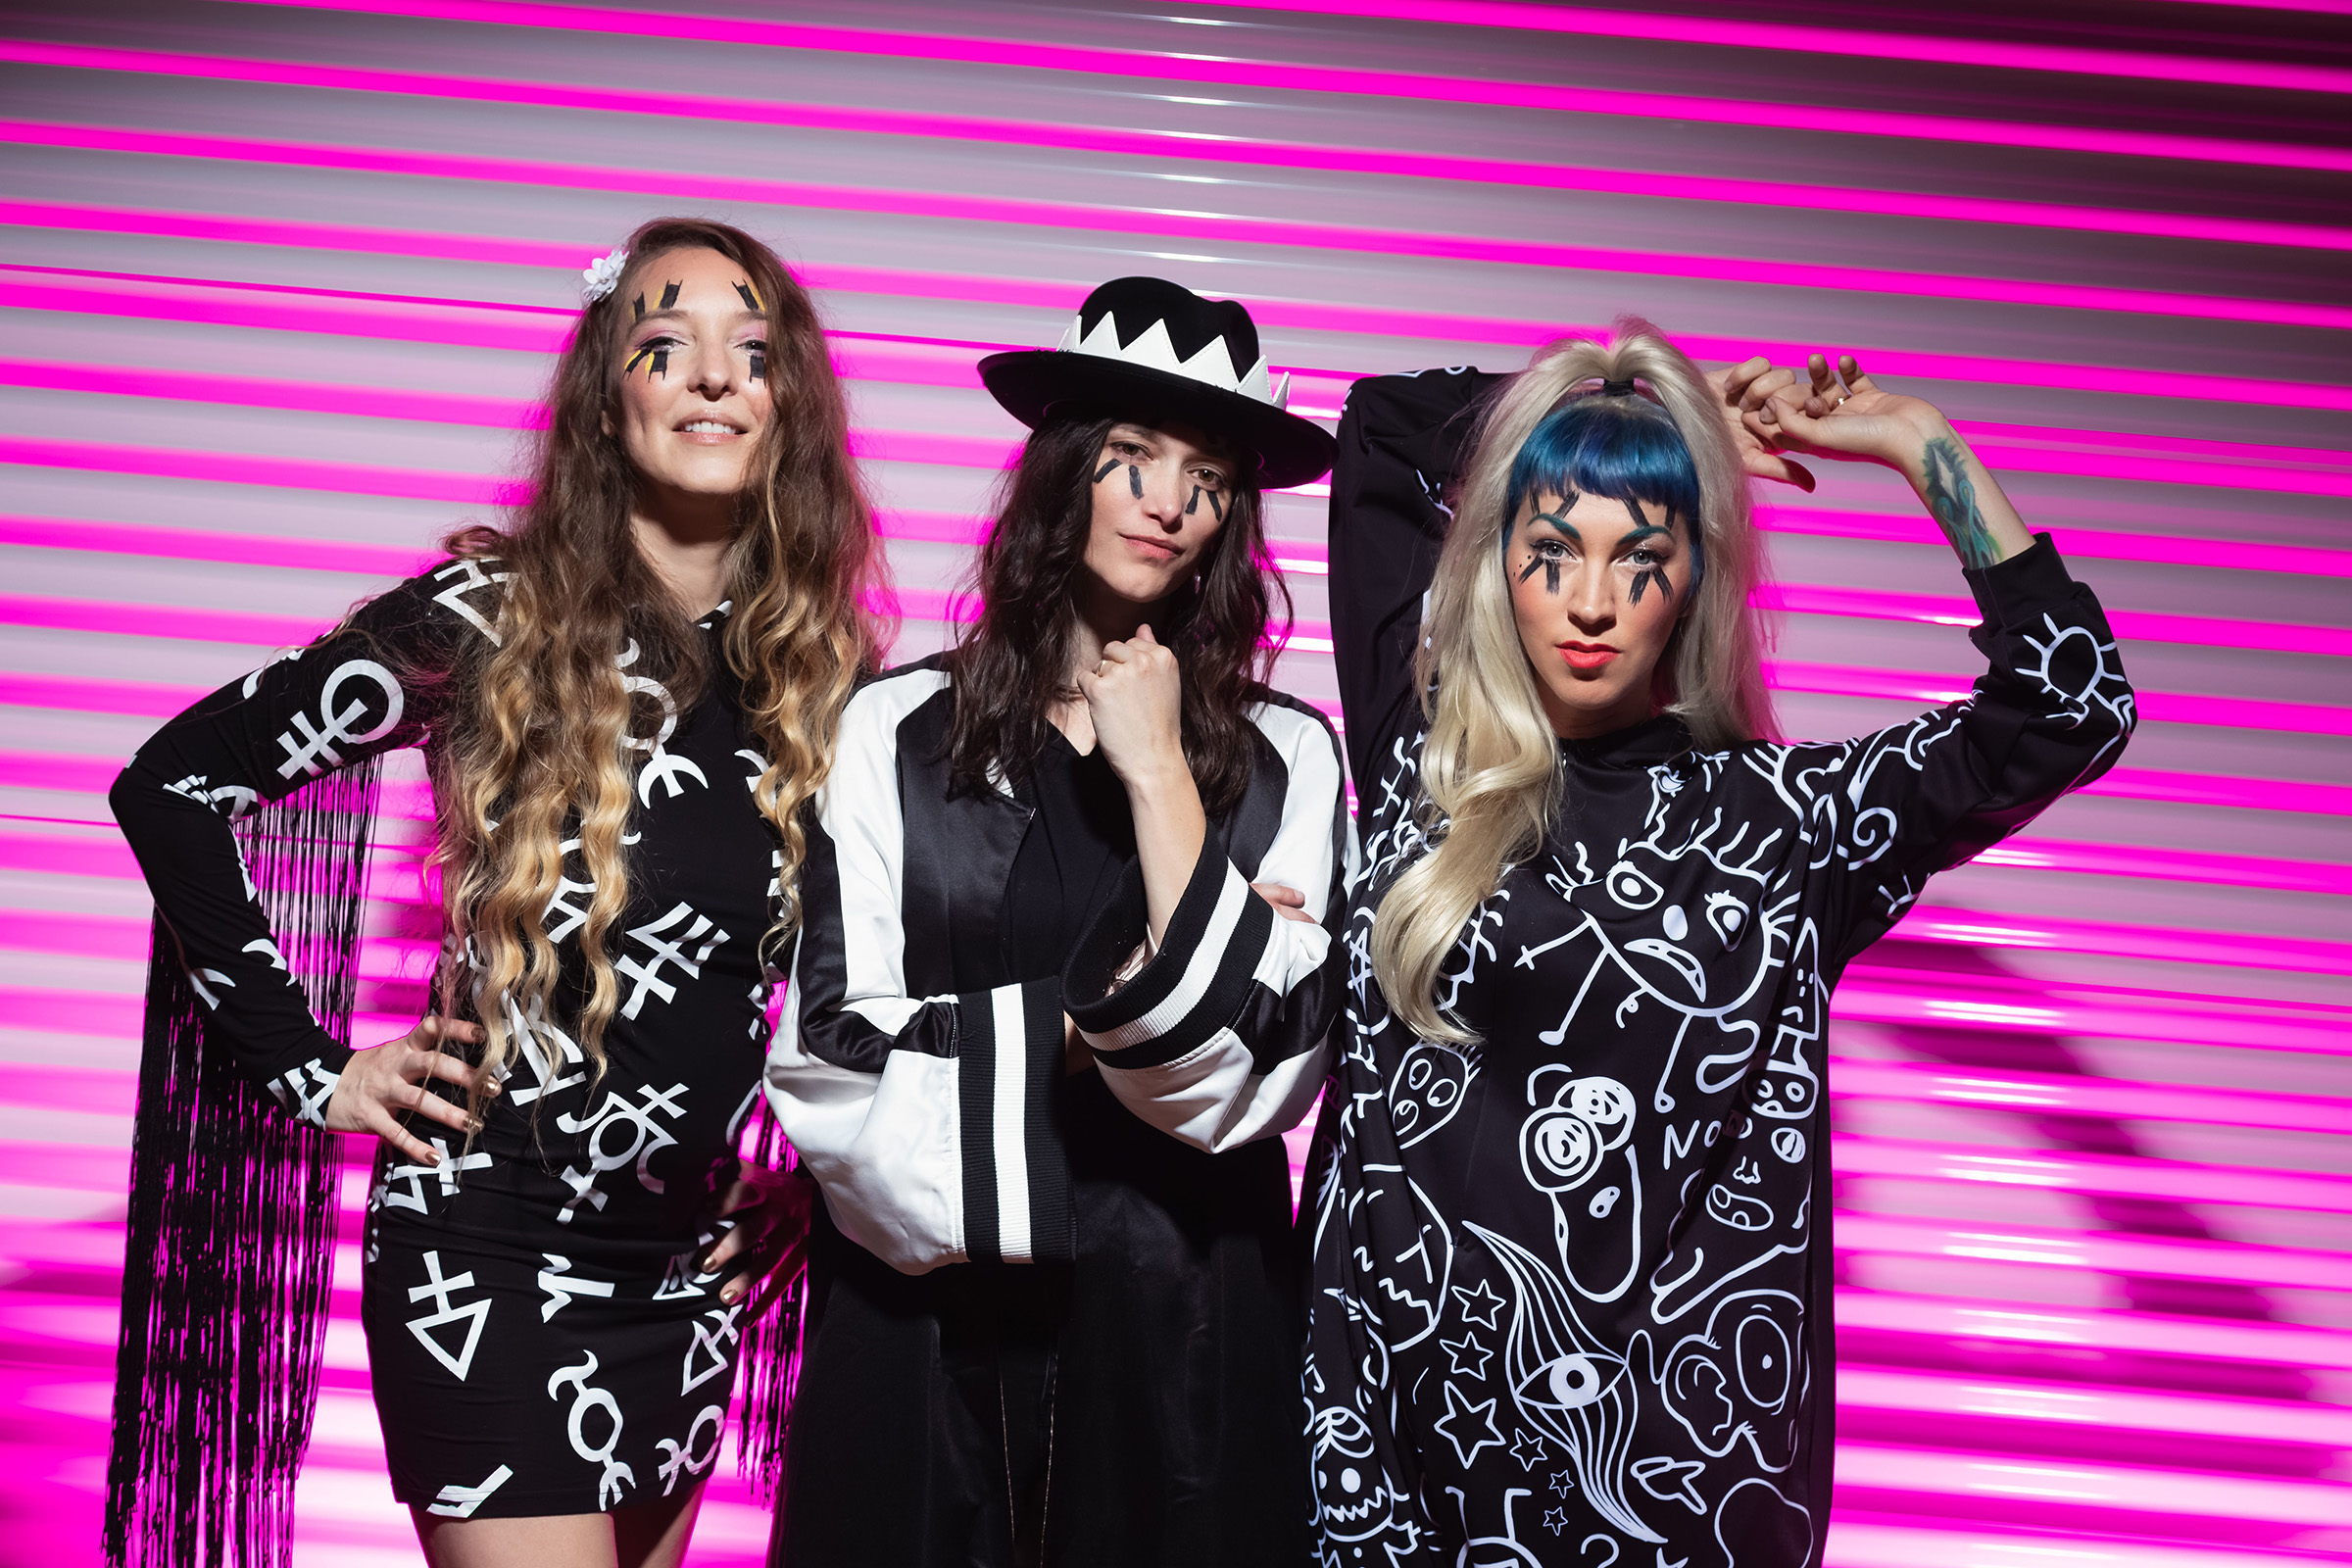 THE DEAD DEADS release video for "Deal With Me" on International Women's Day 